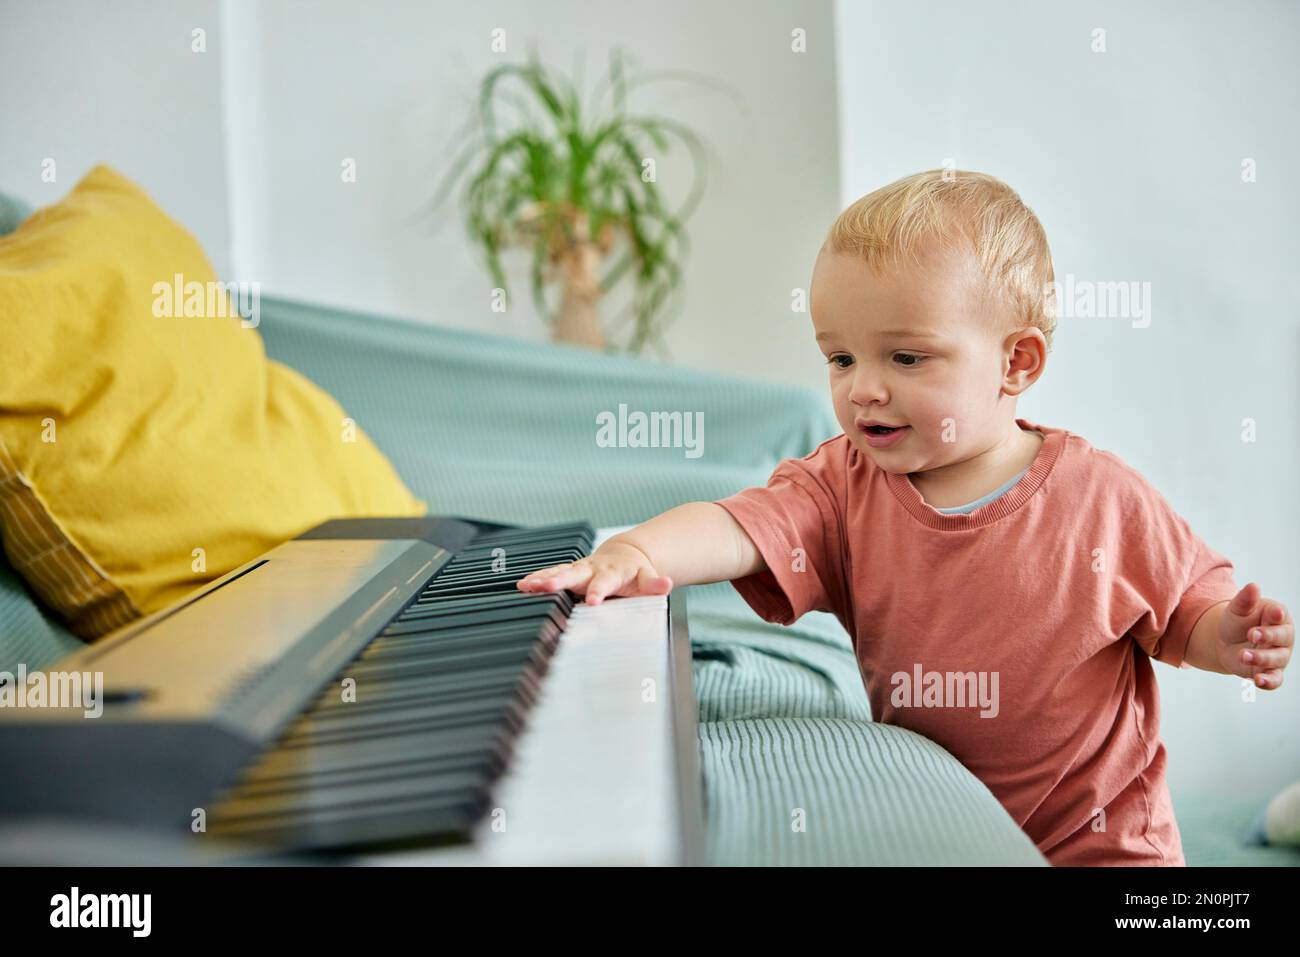 Toddler playing with electronic piano keyboard on sofa Stock Photo